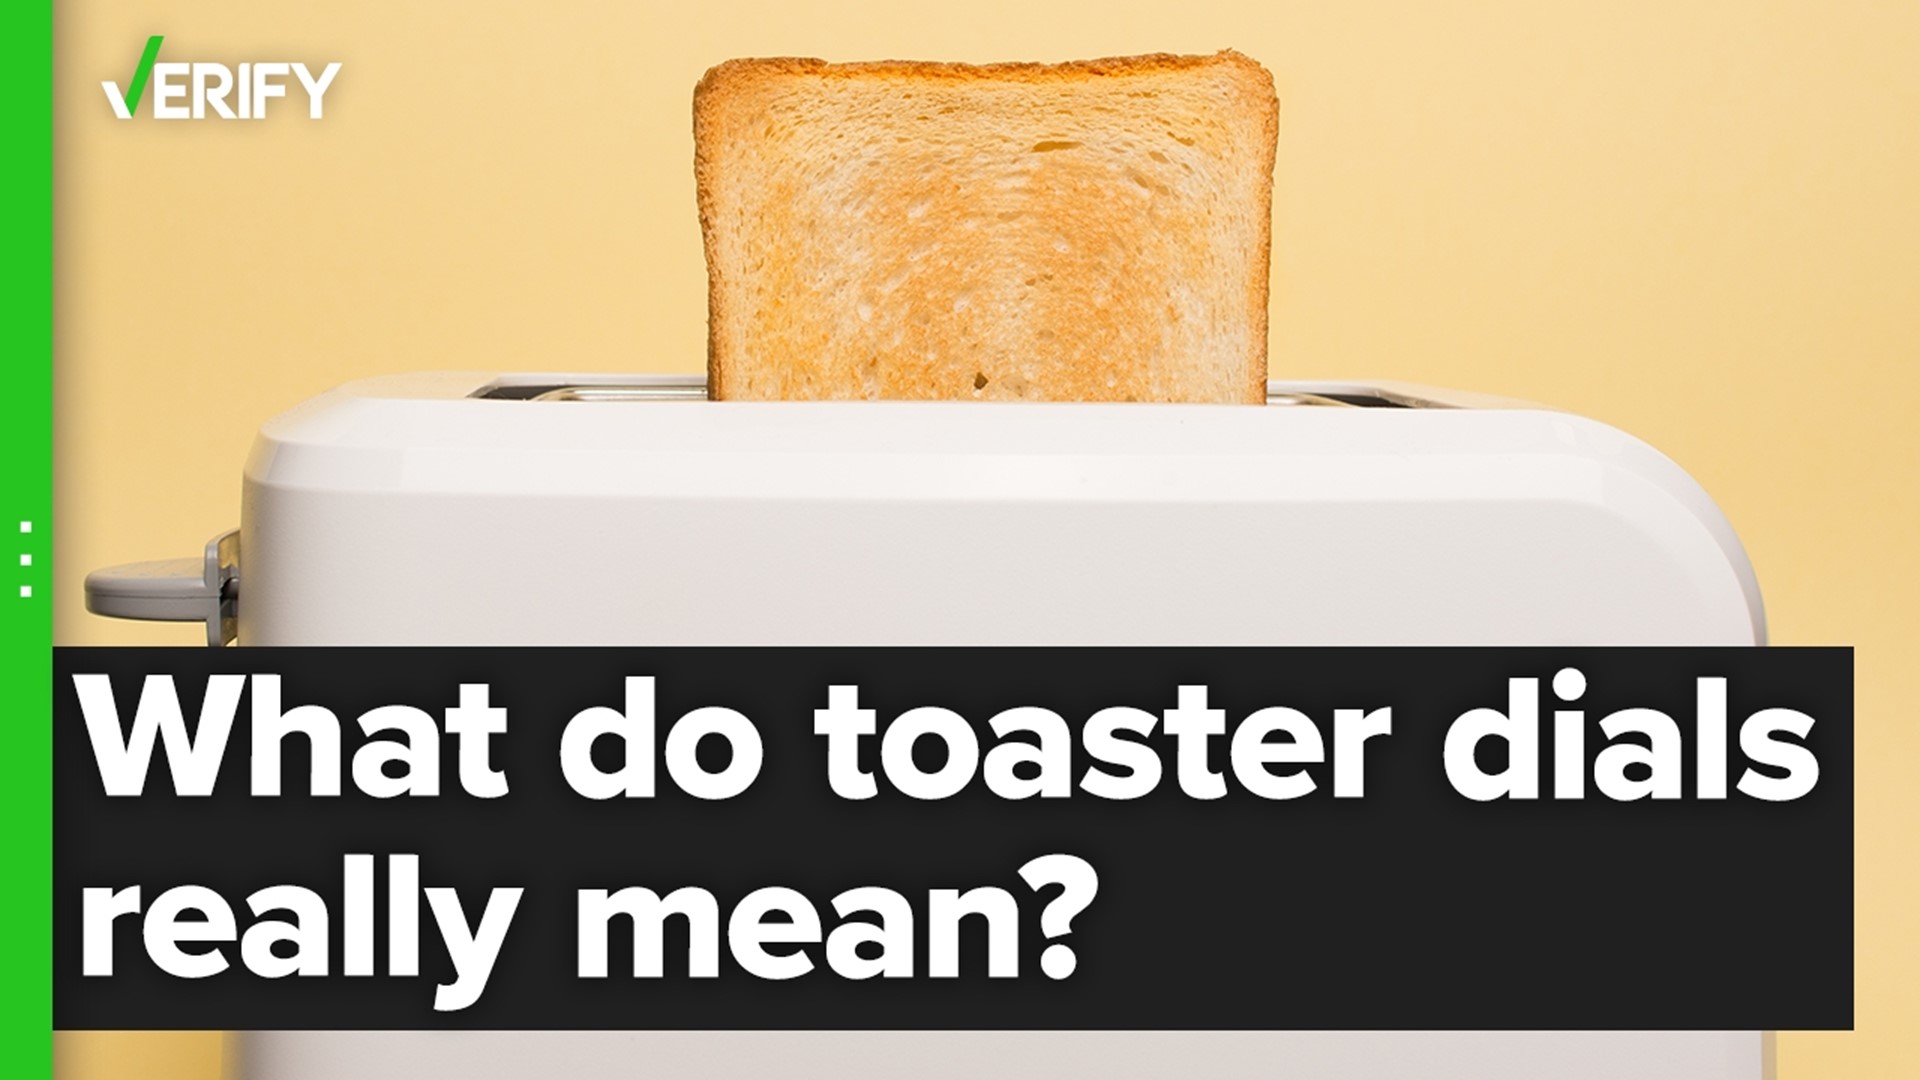 Does the dial on the side of a toaster indicate minutes of toast time?  The VERIFY team confirms this is false.